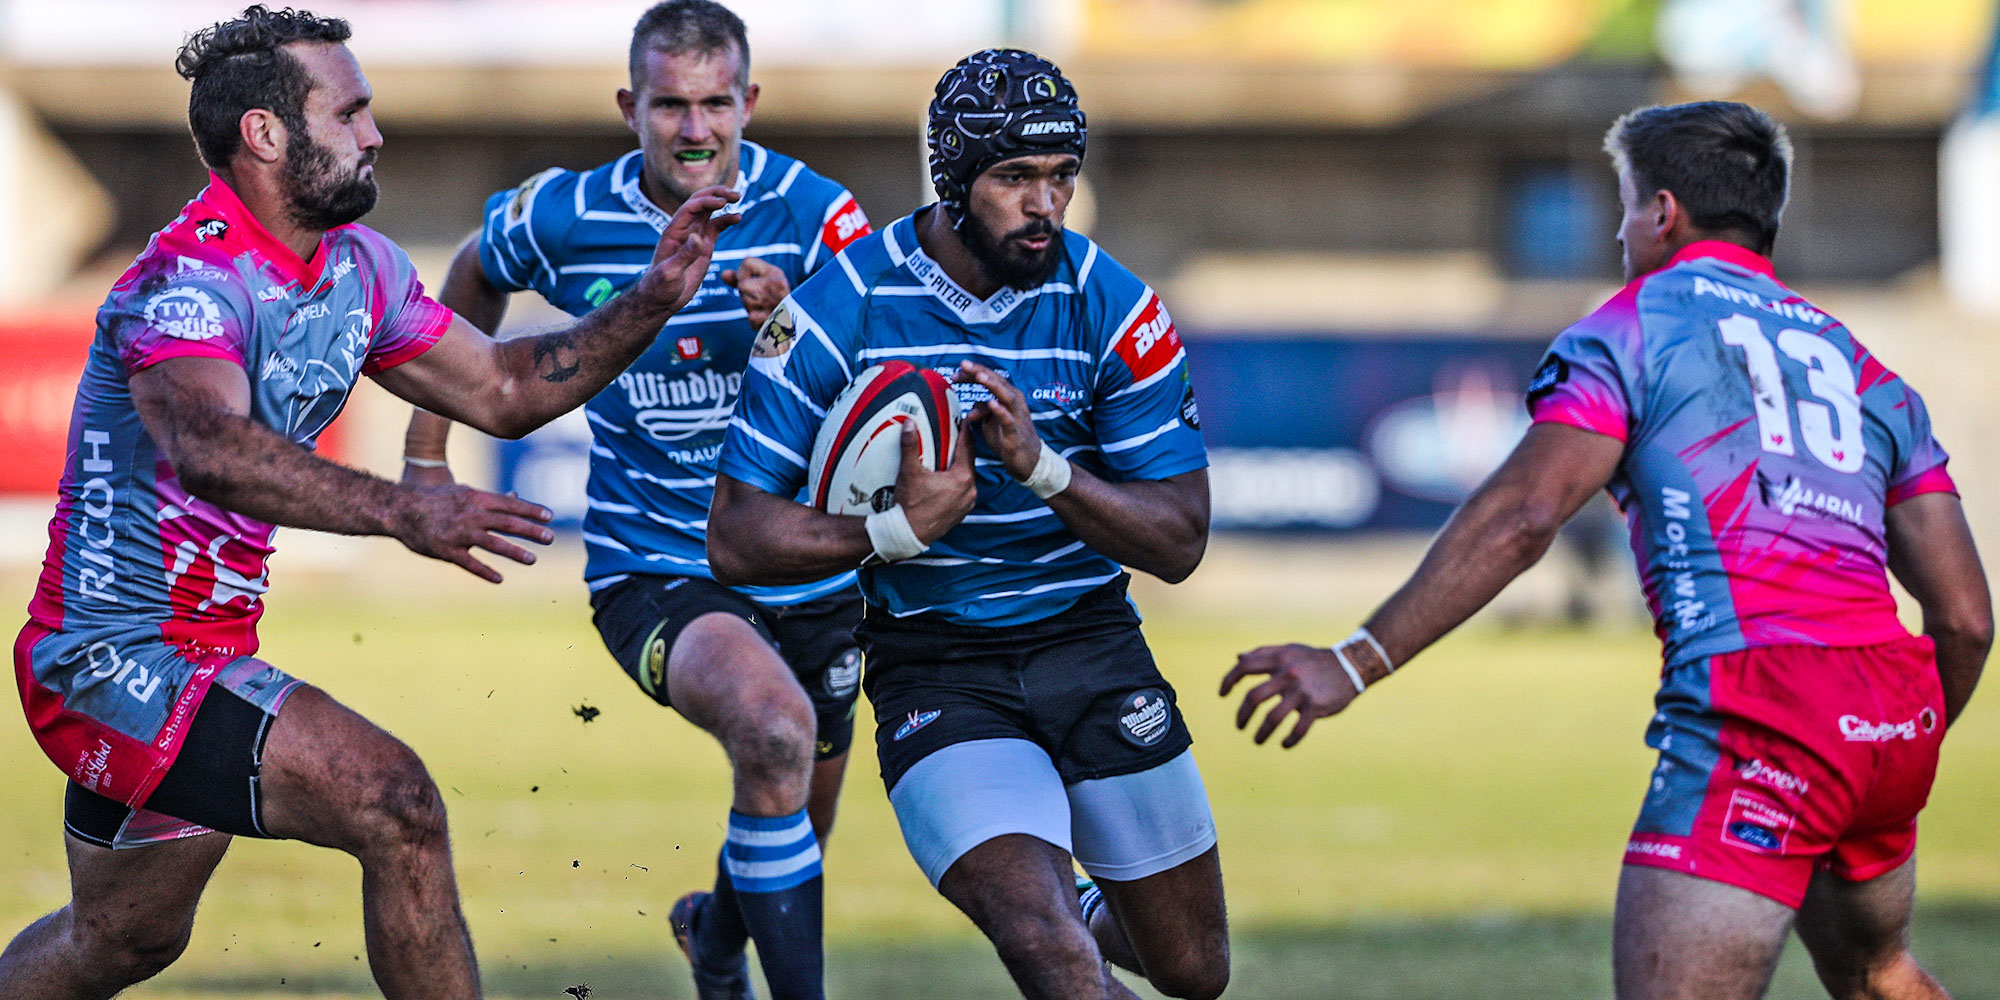 Munier Hartzenberg bursts through for Windhoek Draught Griquas' only try of the final.